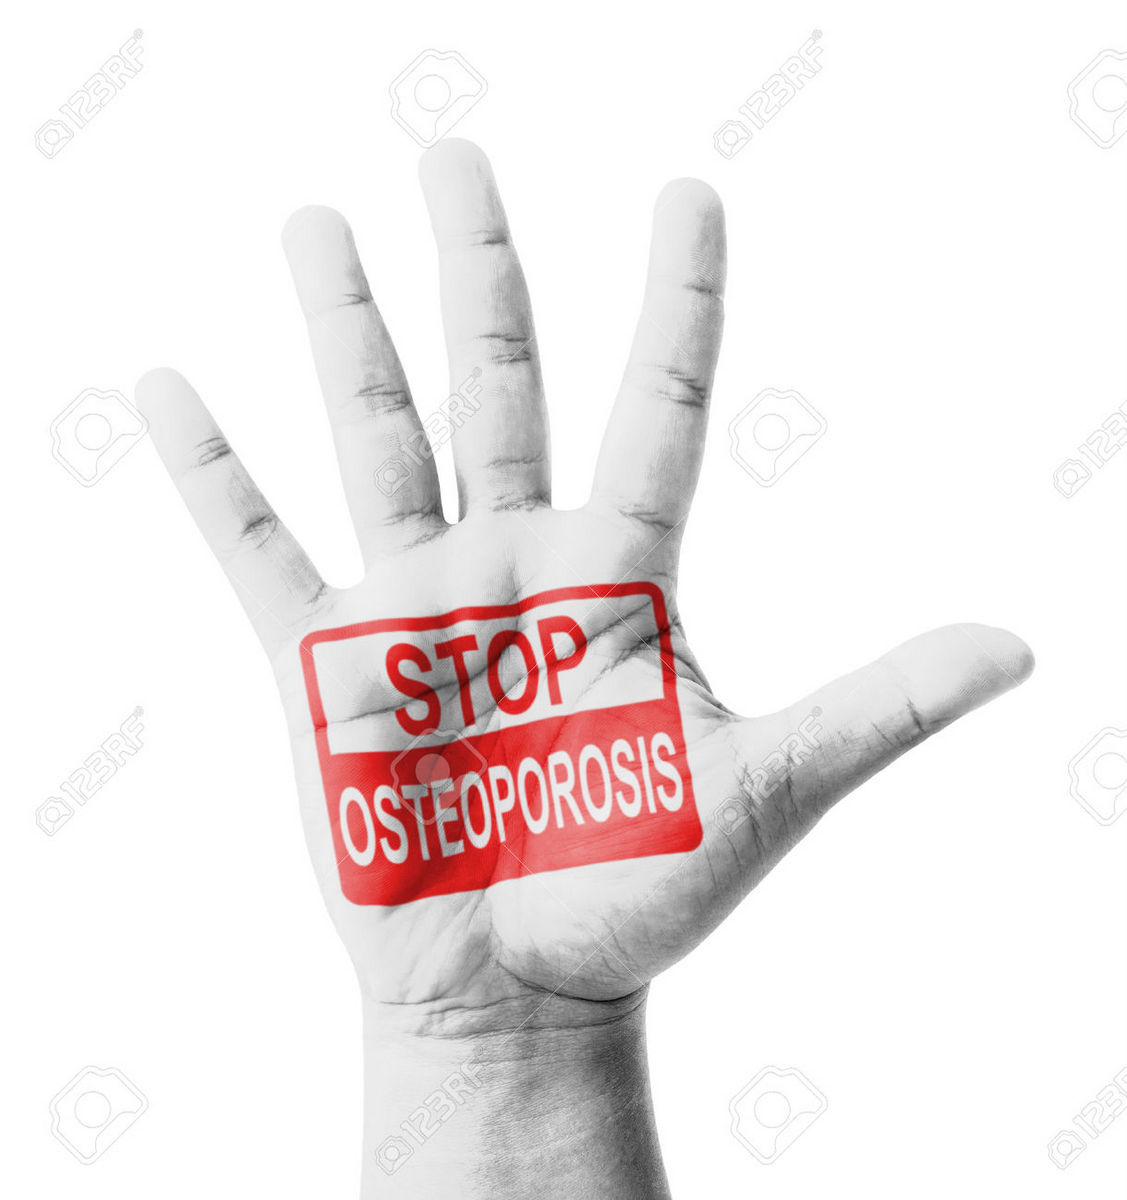 How To Prevent Osteoporosis